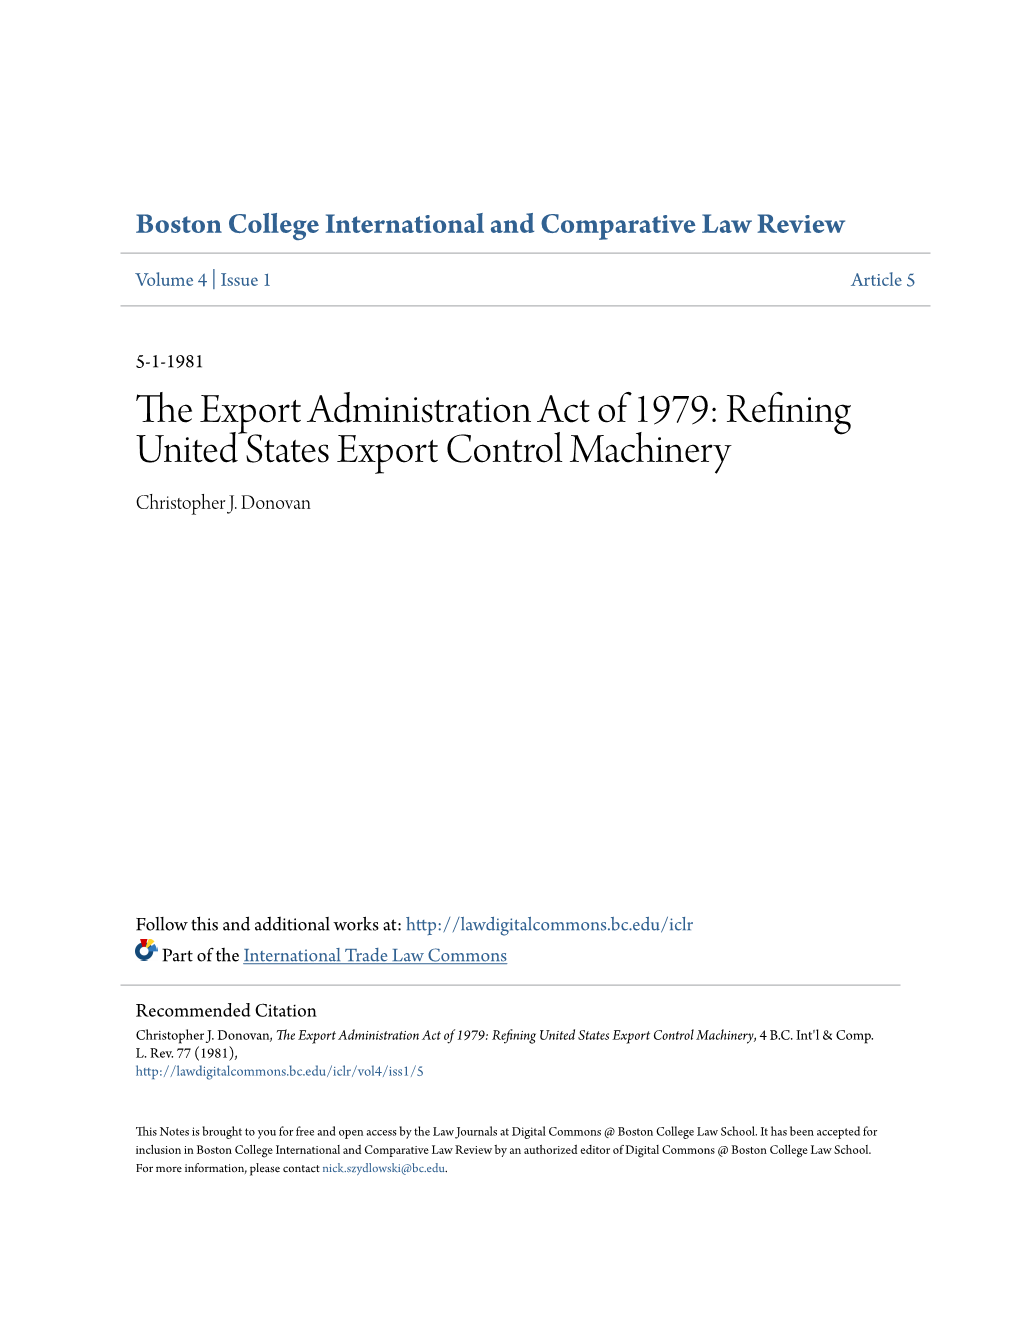 The Export Administration Act of 1979: Refining United States Export Control Machinery Christopher J